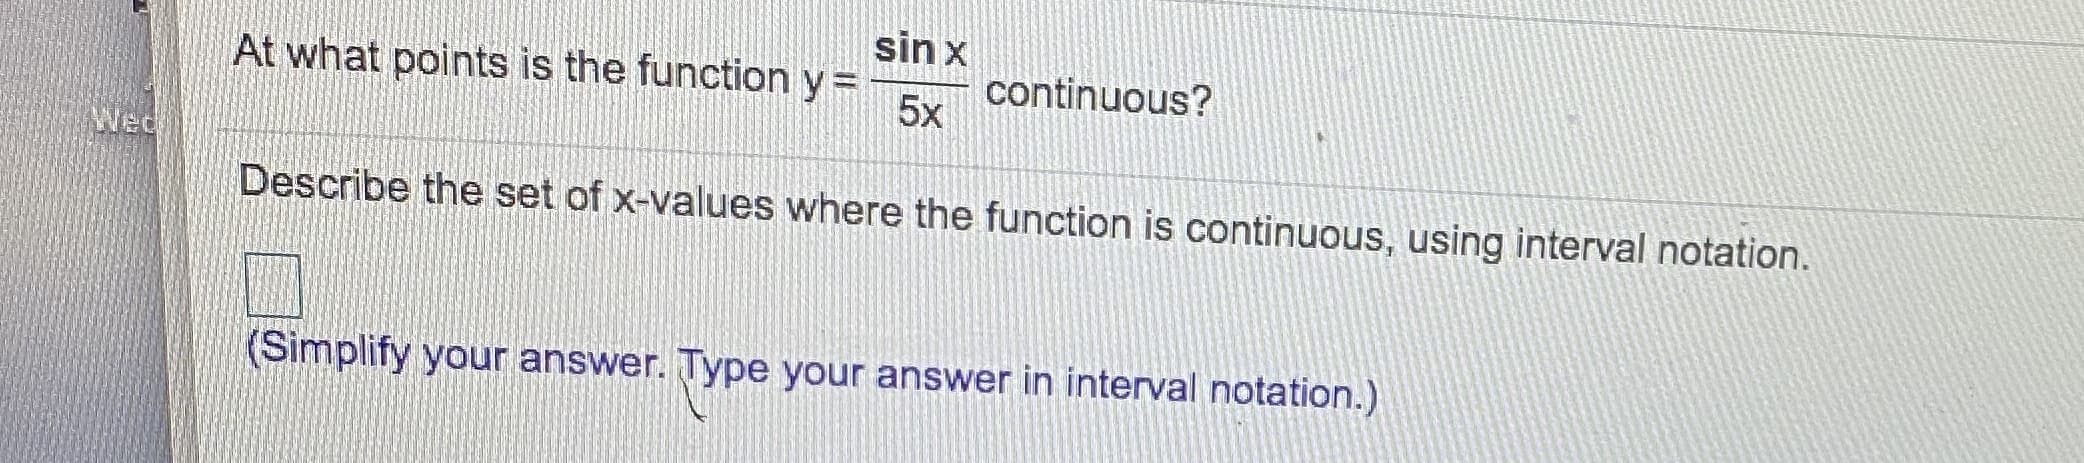 sin x
At what points is the function y =
y%=
continuous?
5x
Describe the set of x-values where the function is continuous, using interval notation.
SimpliE
